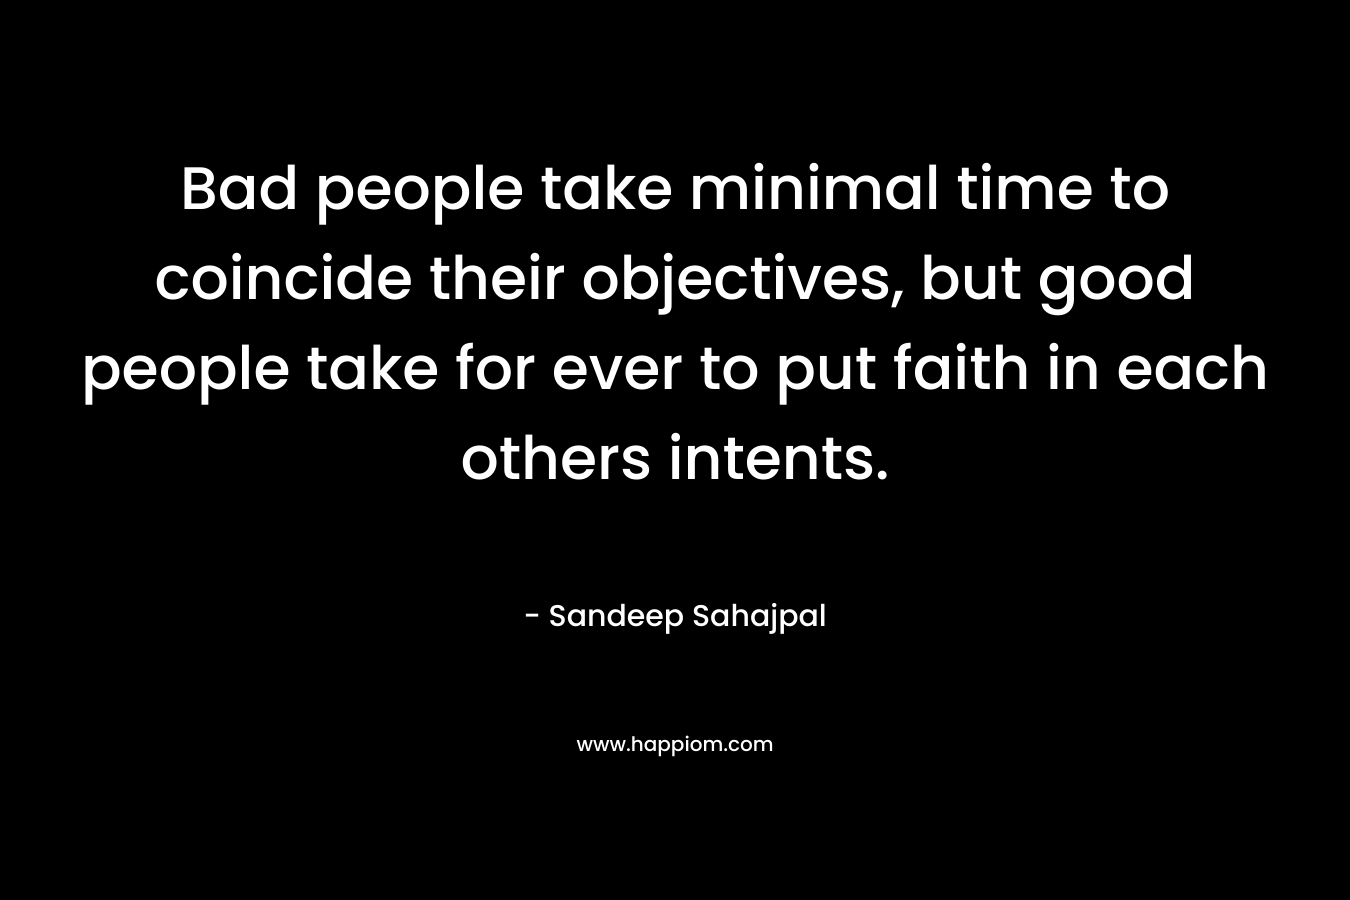 Bad people take minimal time to coincide their objectives, but good people take for ever to put faith in each others intents. – Sandeep Sahajpal